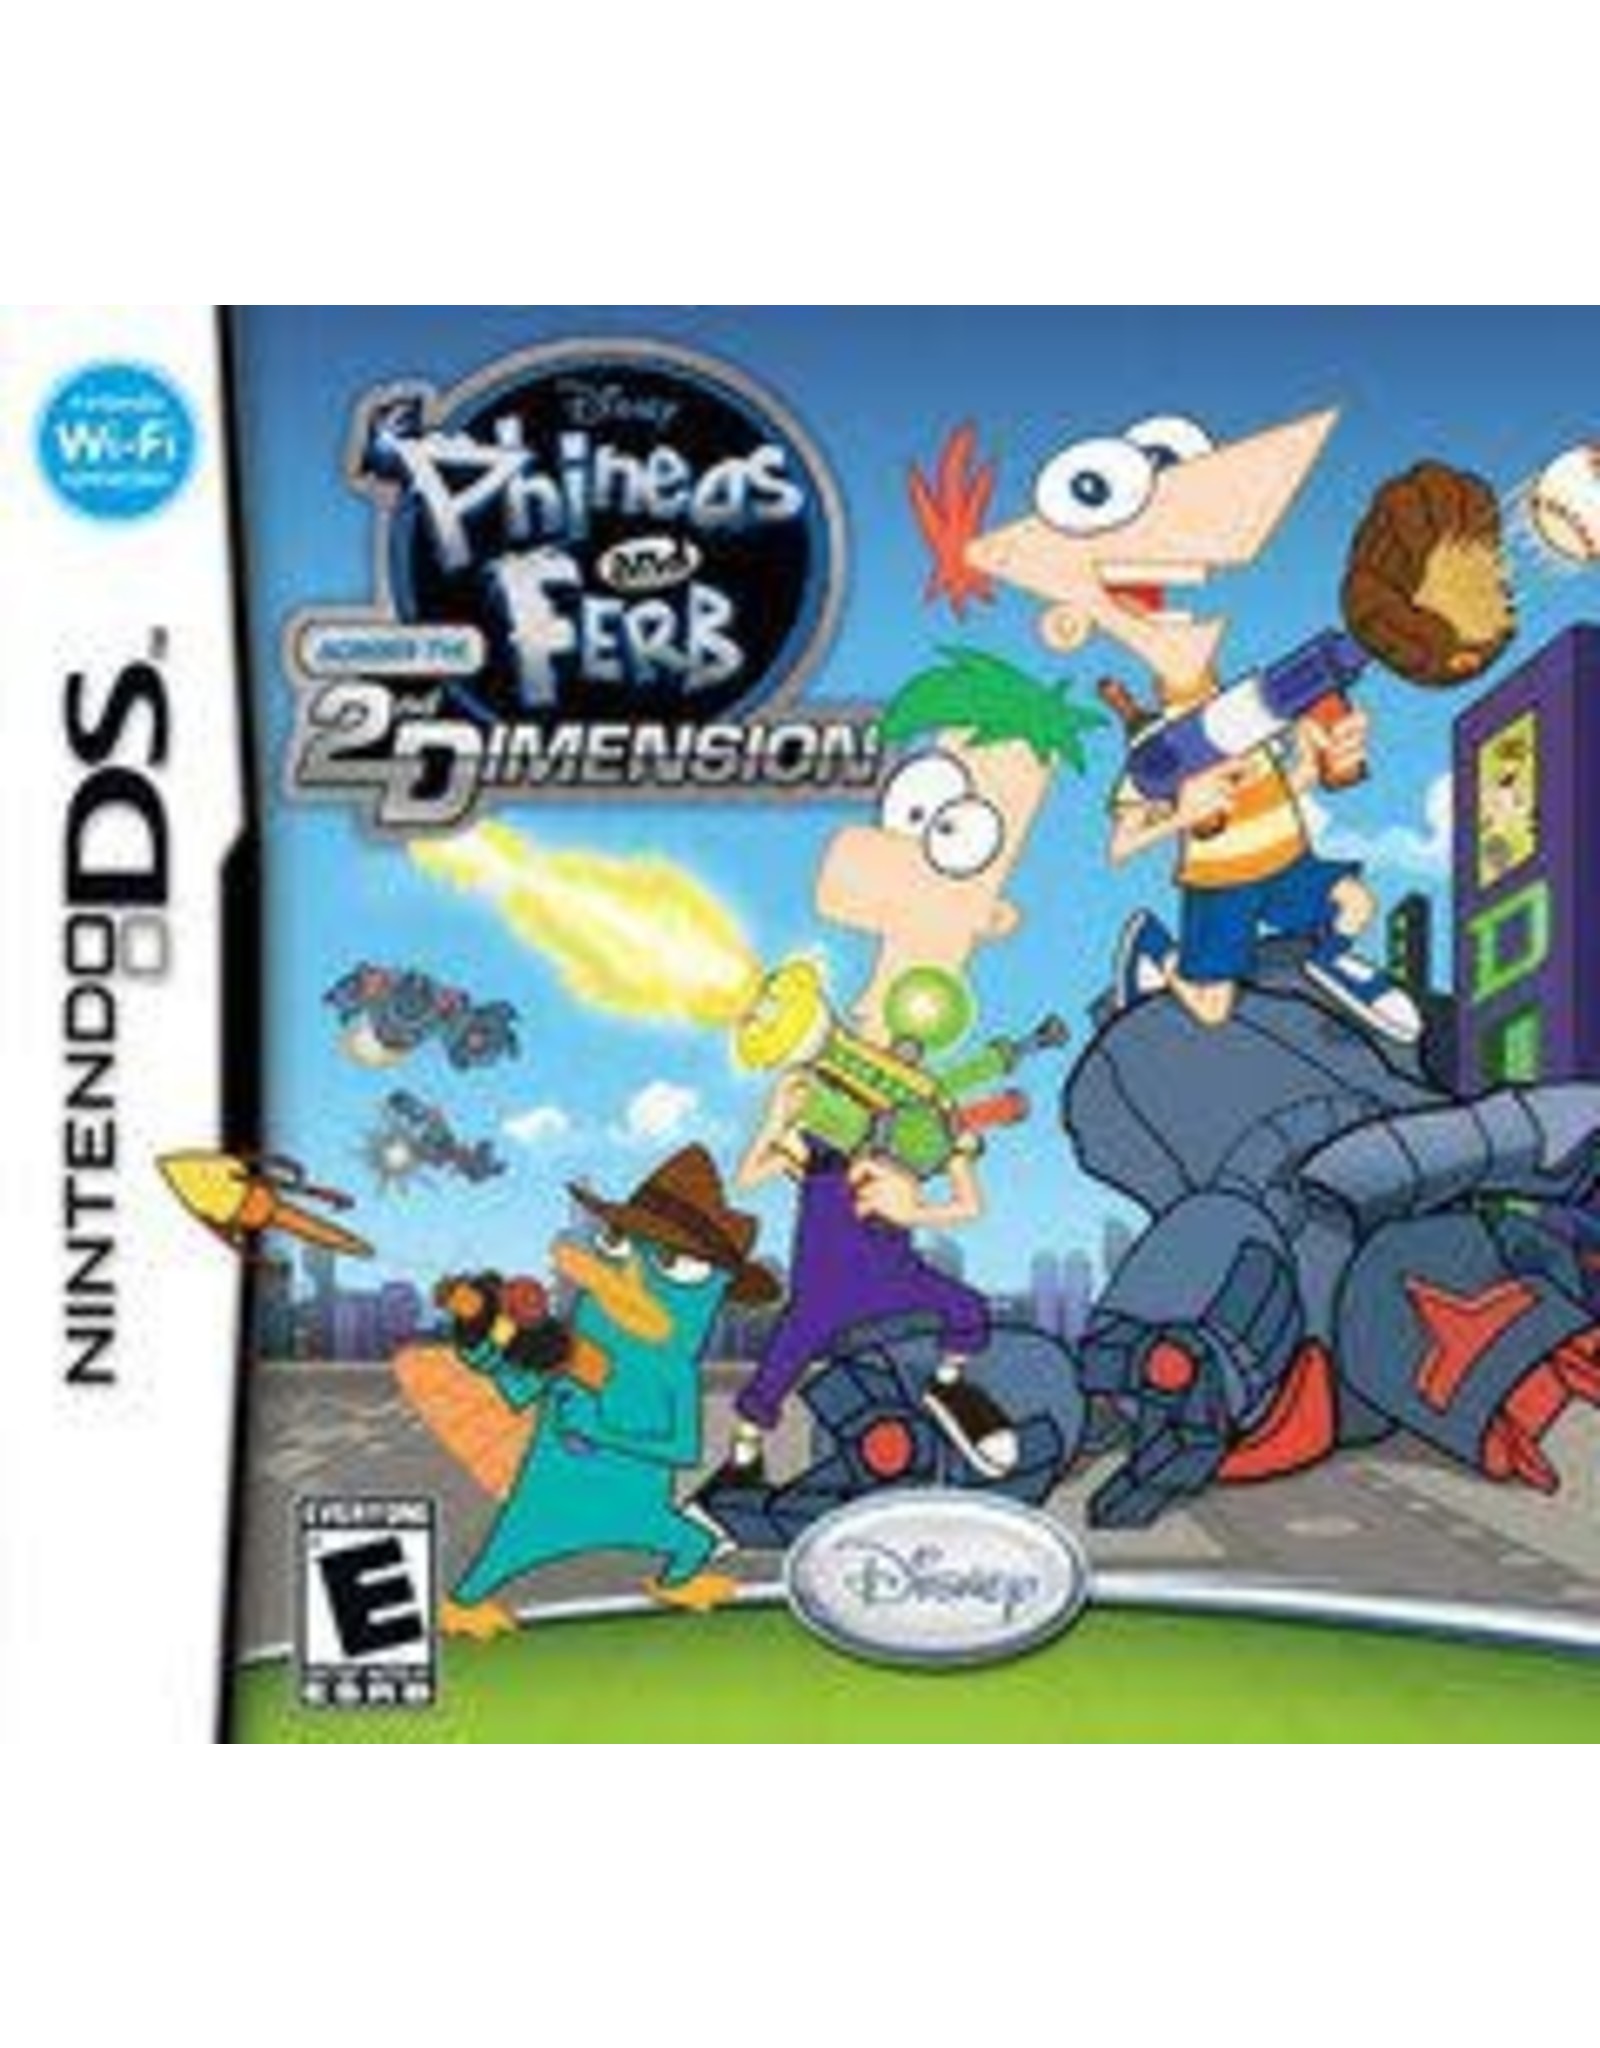 Nintendo DS Phineas and Ferb: Across the 2nd Dimension (Cart Only)